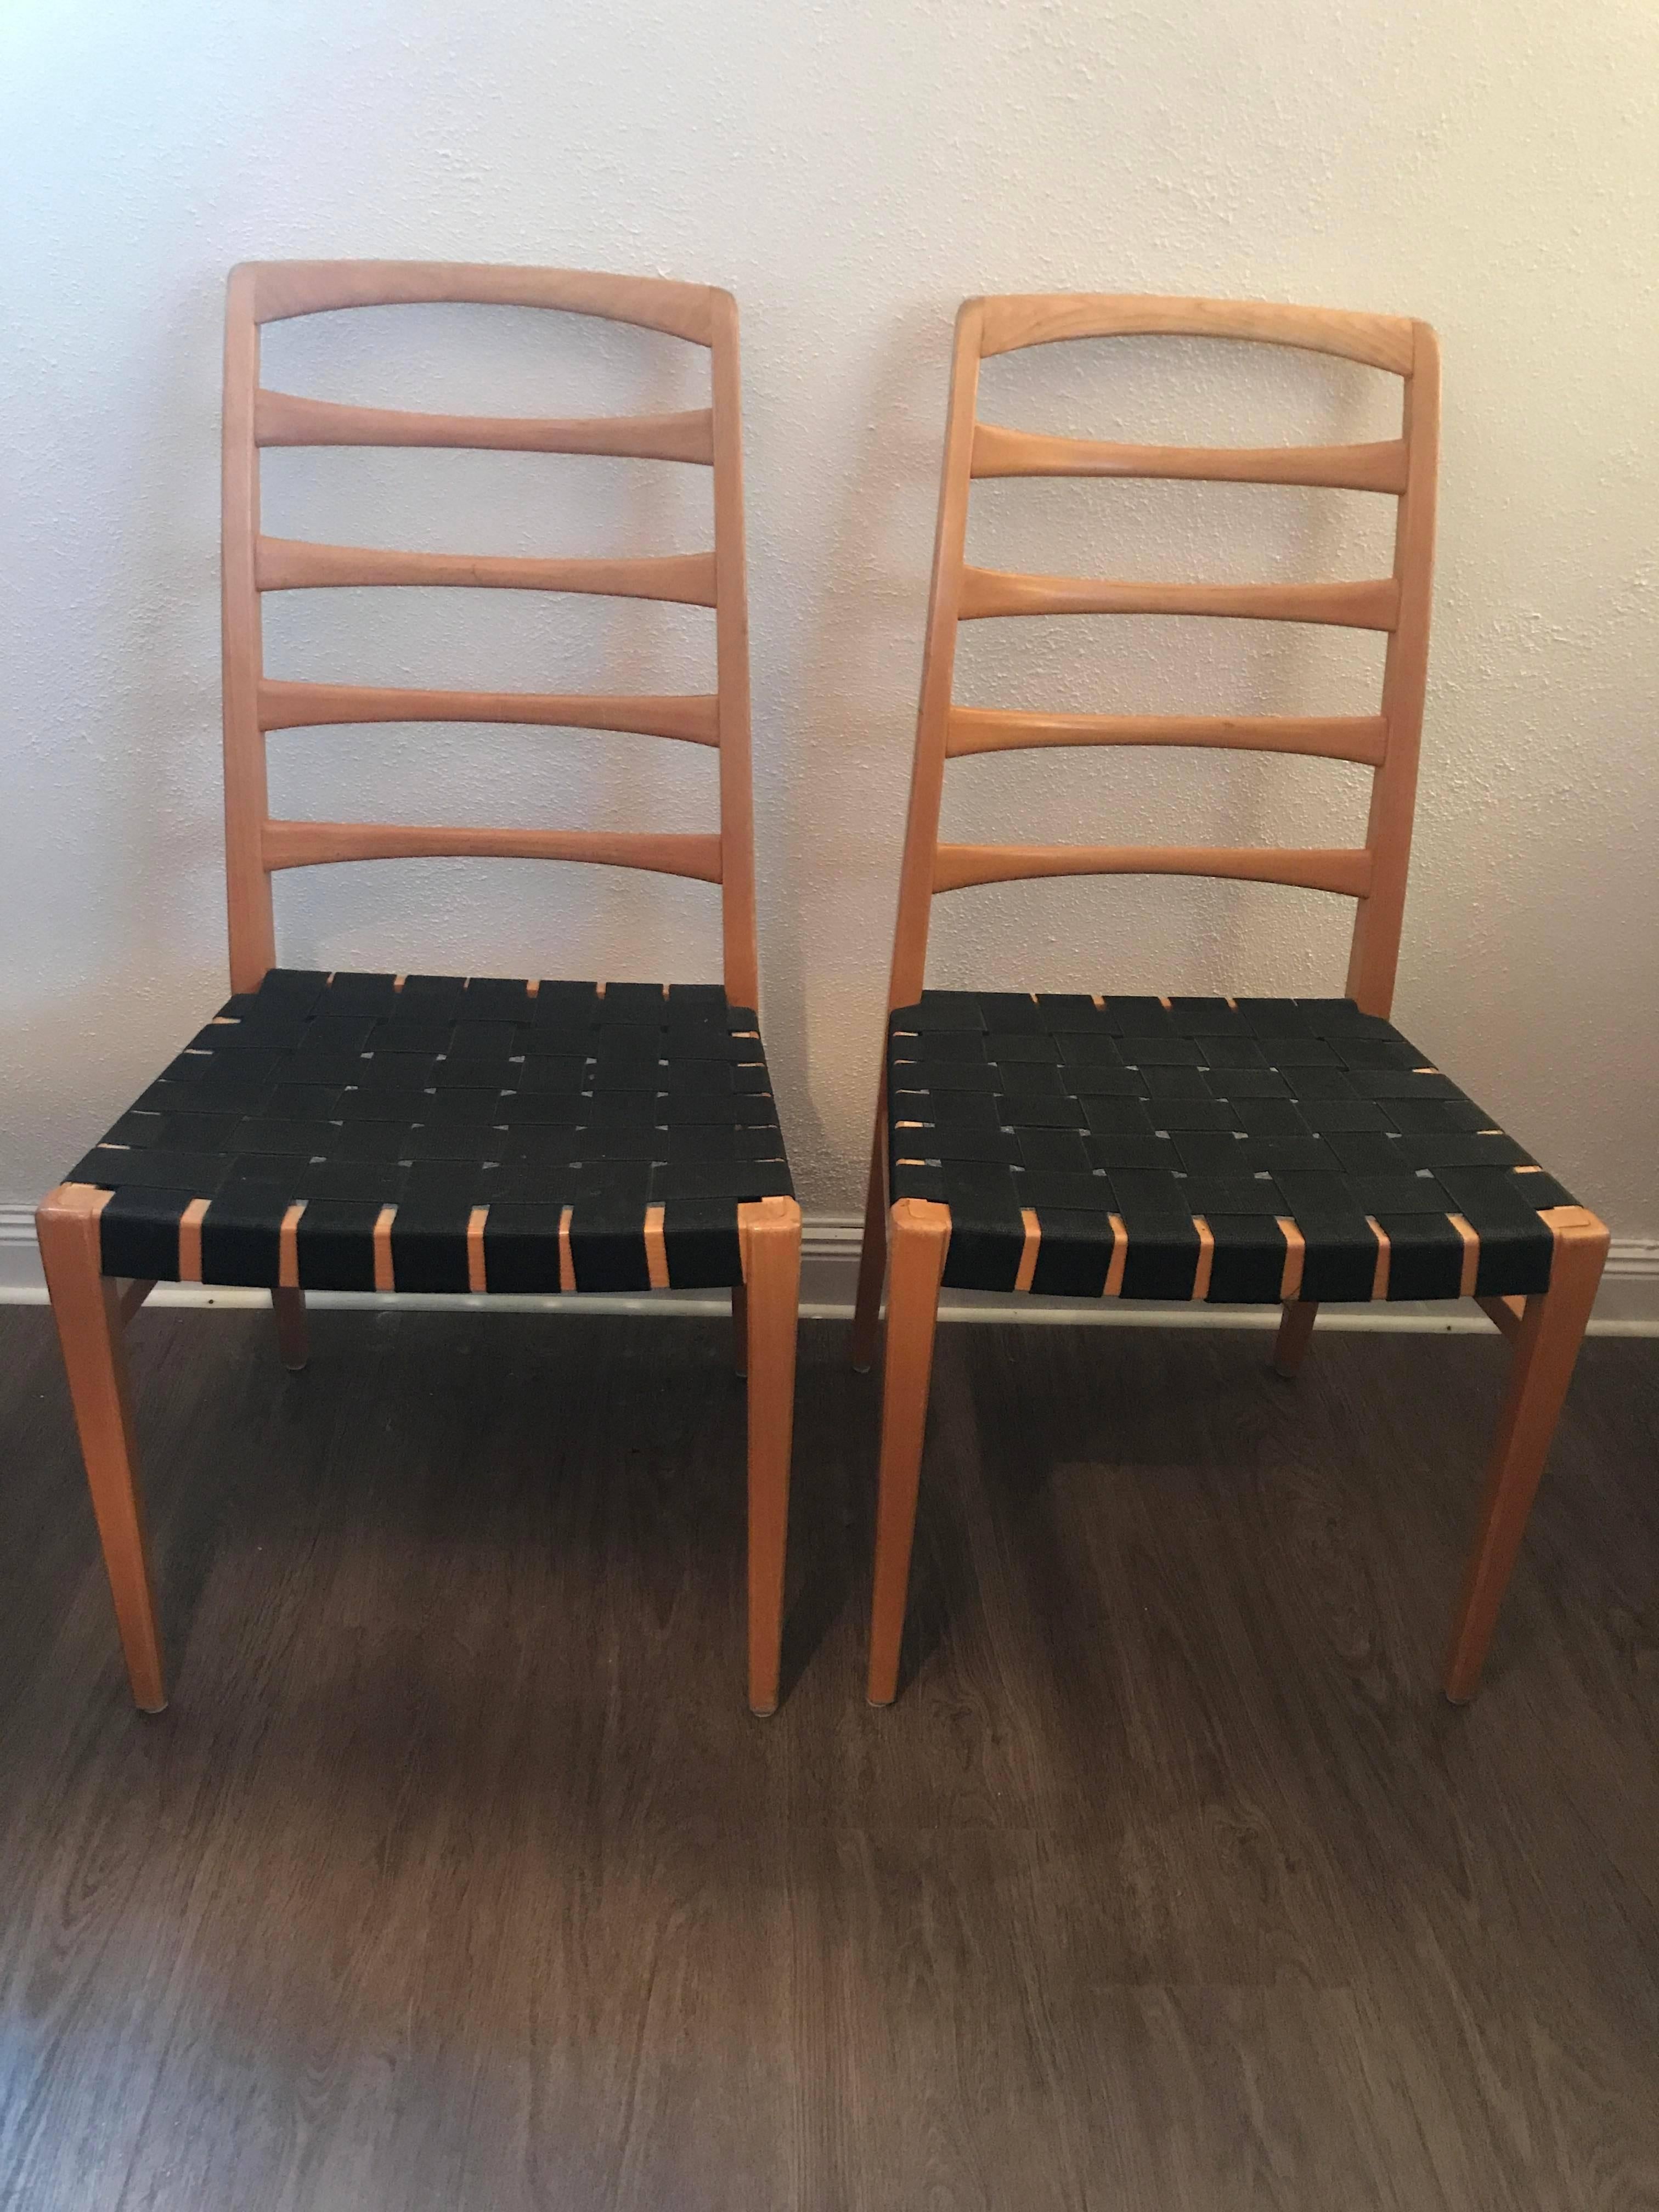 1962 Swedish Bodafors Reno oak chairs designer Bertil Fridhagen eight chairs.
Very beautiful designer oak chairs designed by priced and famous designer Bertil Fridhagen for Bodafors. Bodafors was one of the greatest furniture manufacturing company